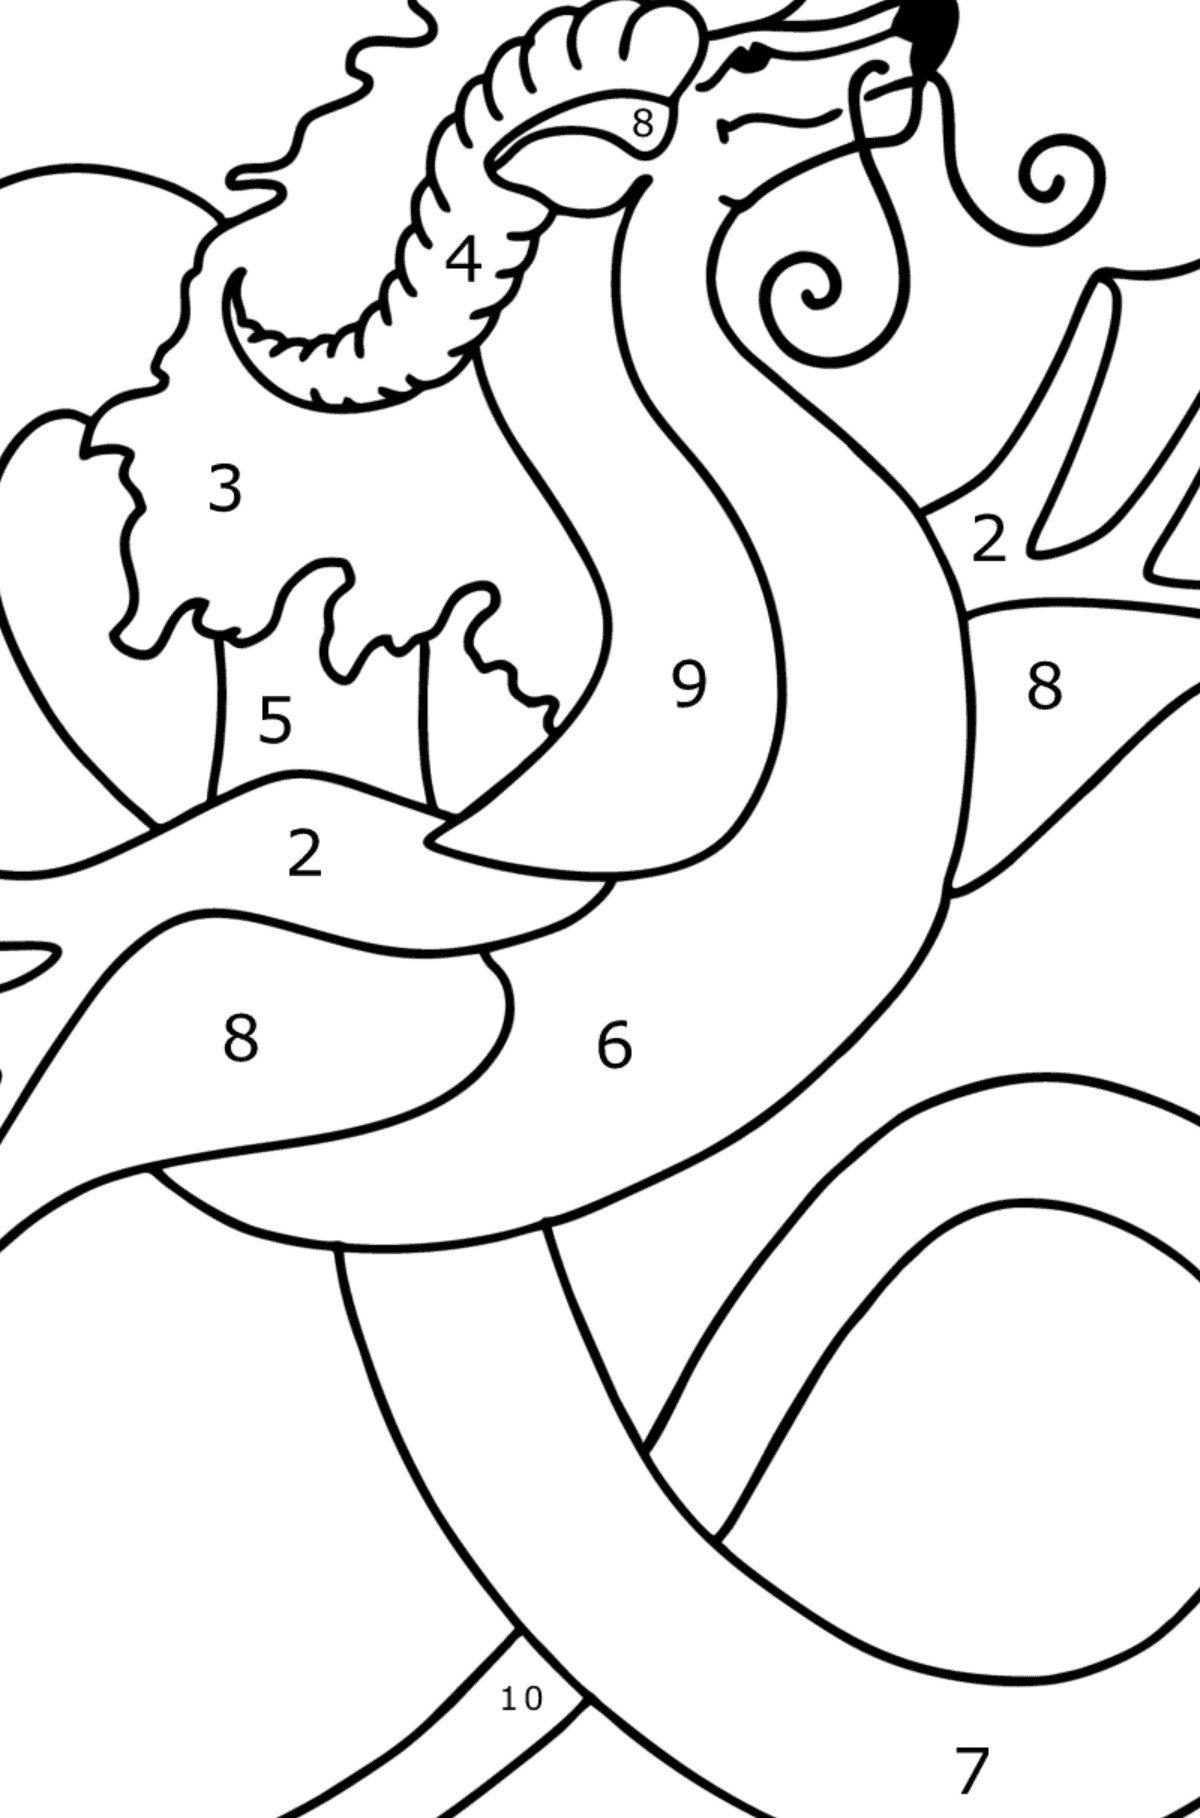 Flying Dragon coloring page - Coloring by Numbers for Kids